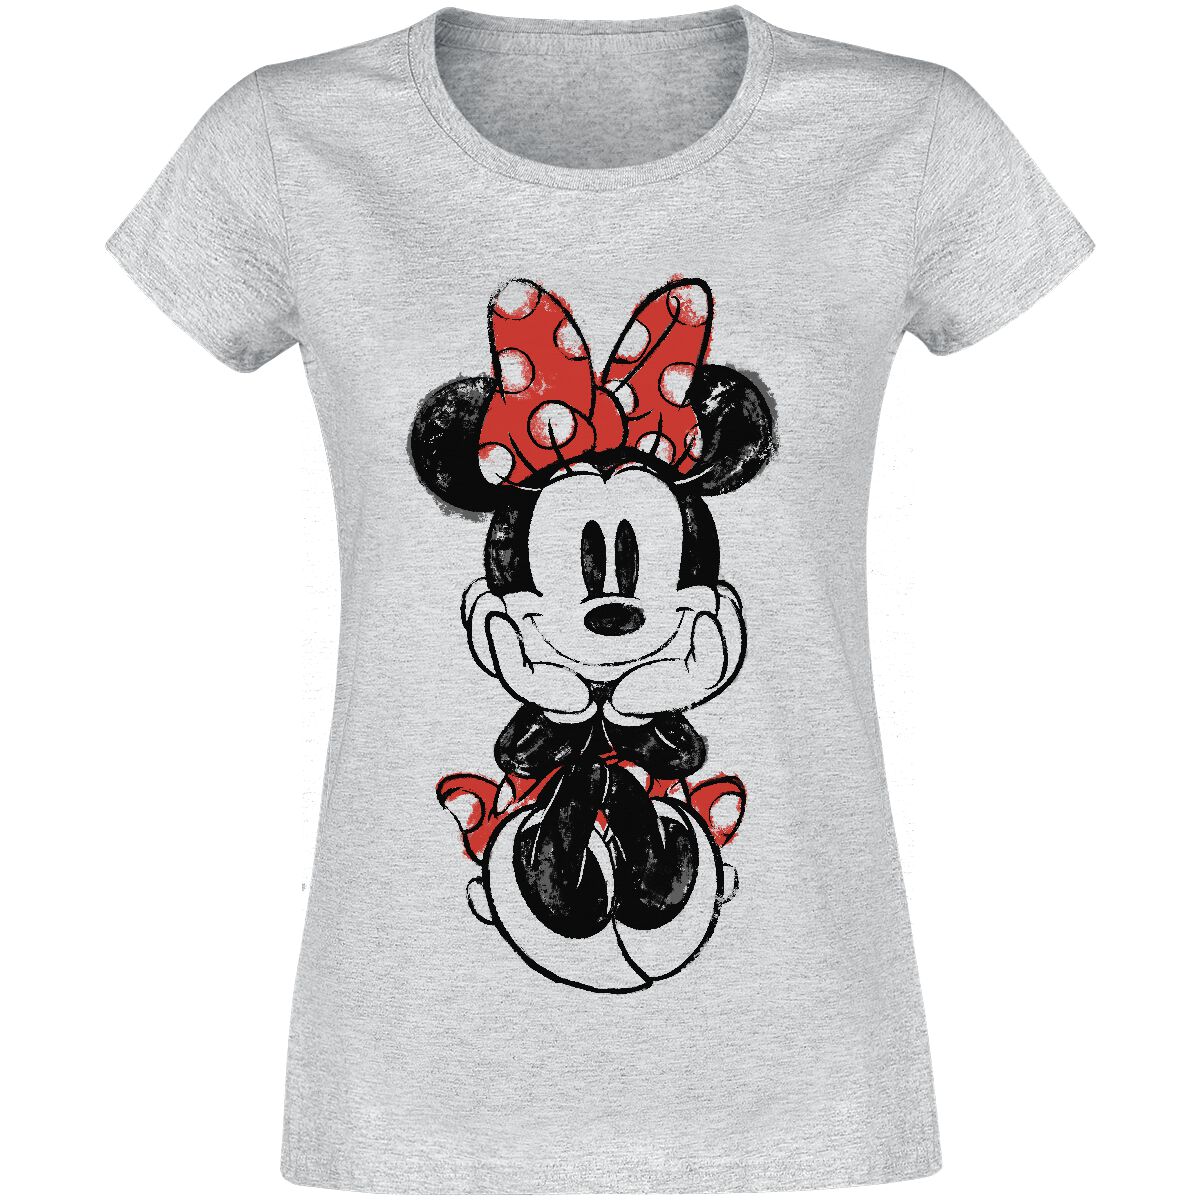 Mickey Mouse Minnie Maus T-Shirt grau in XXL von Mickey Mouse